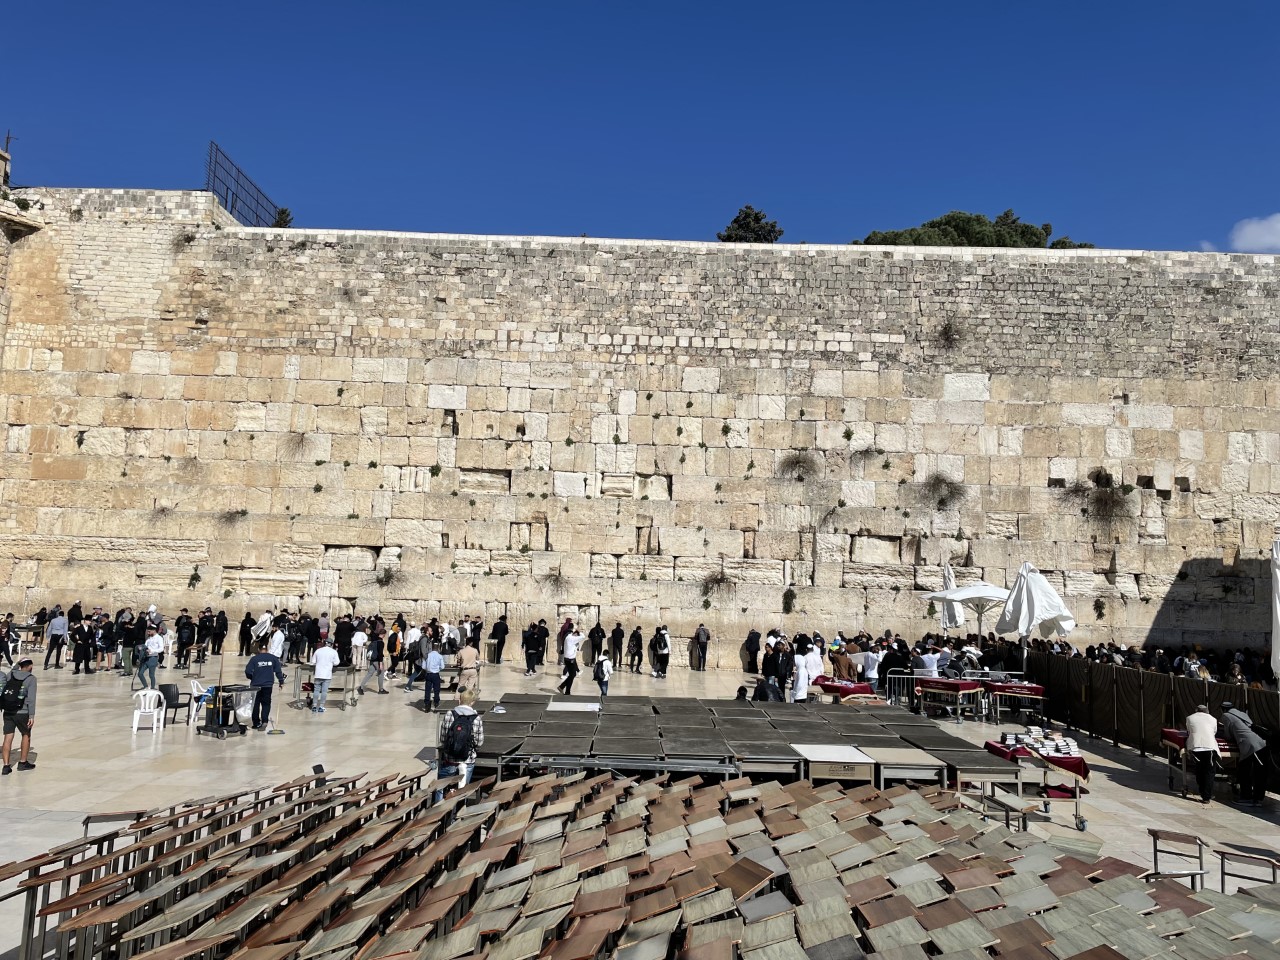 A Week in Israel: 25 Top Things to See and Do by guest writers, Dr. Kathy Butts and Hap Wade